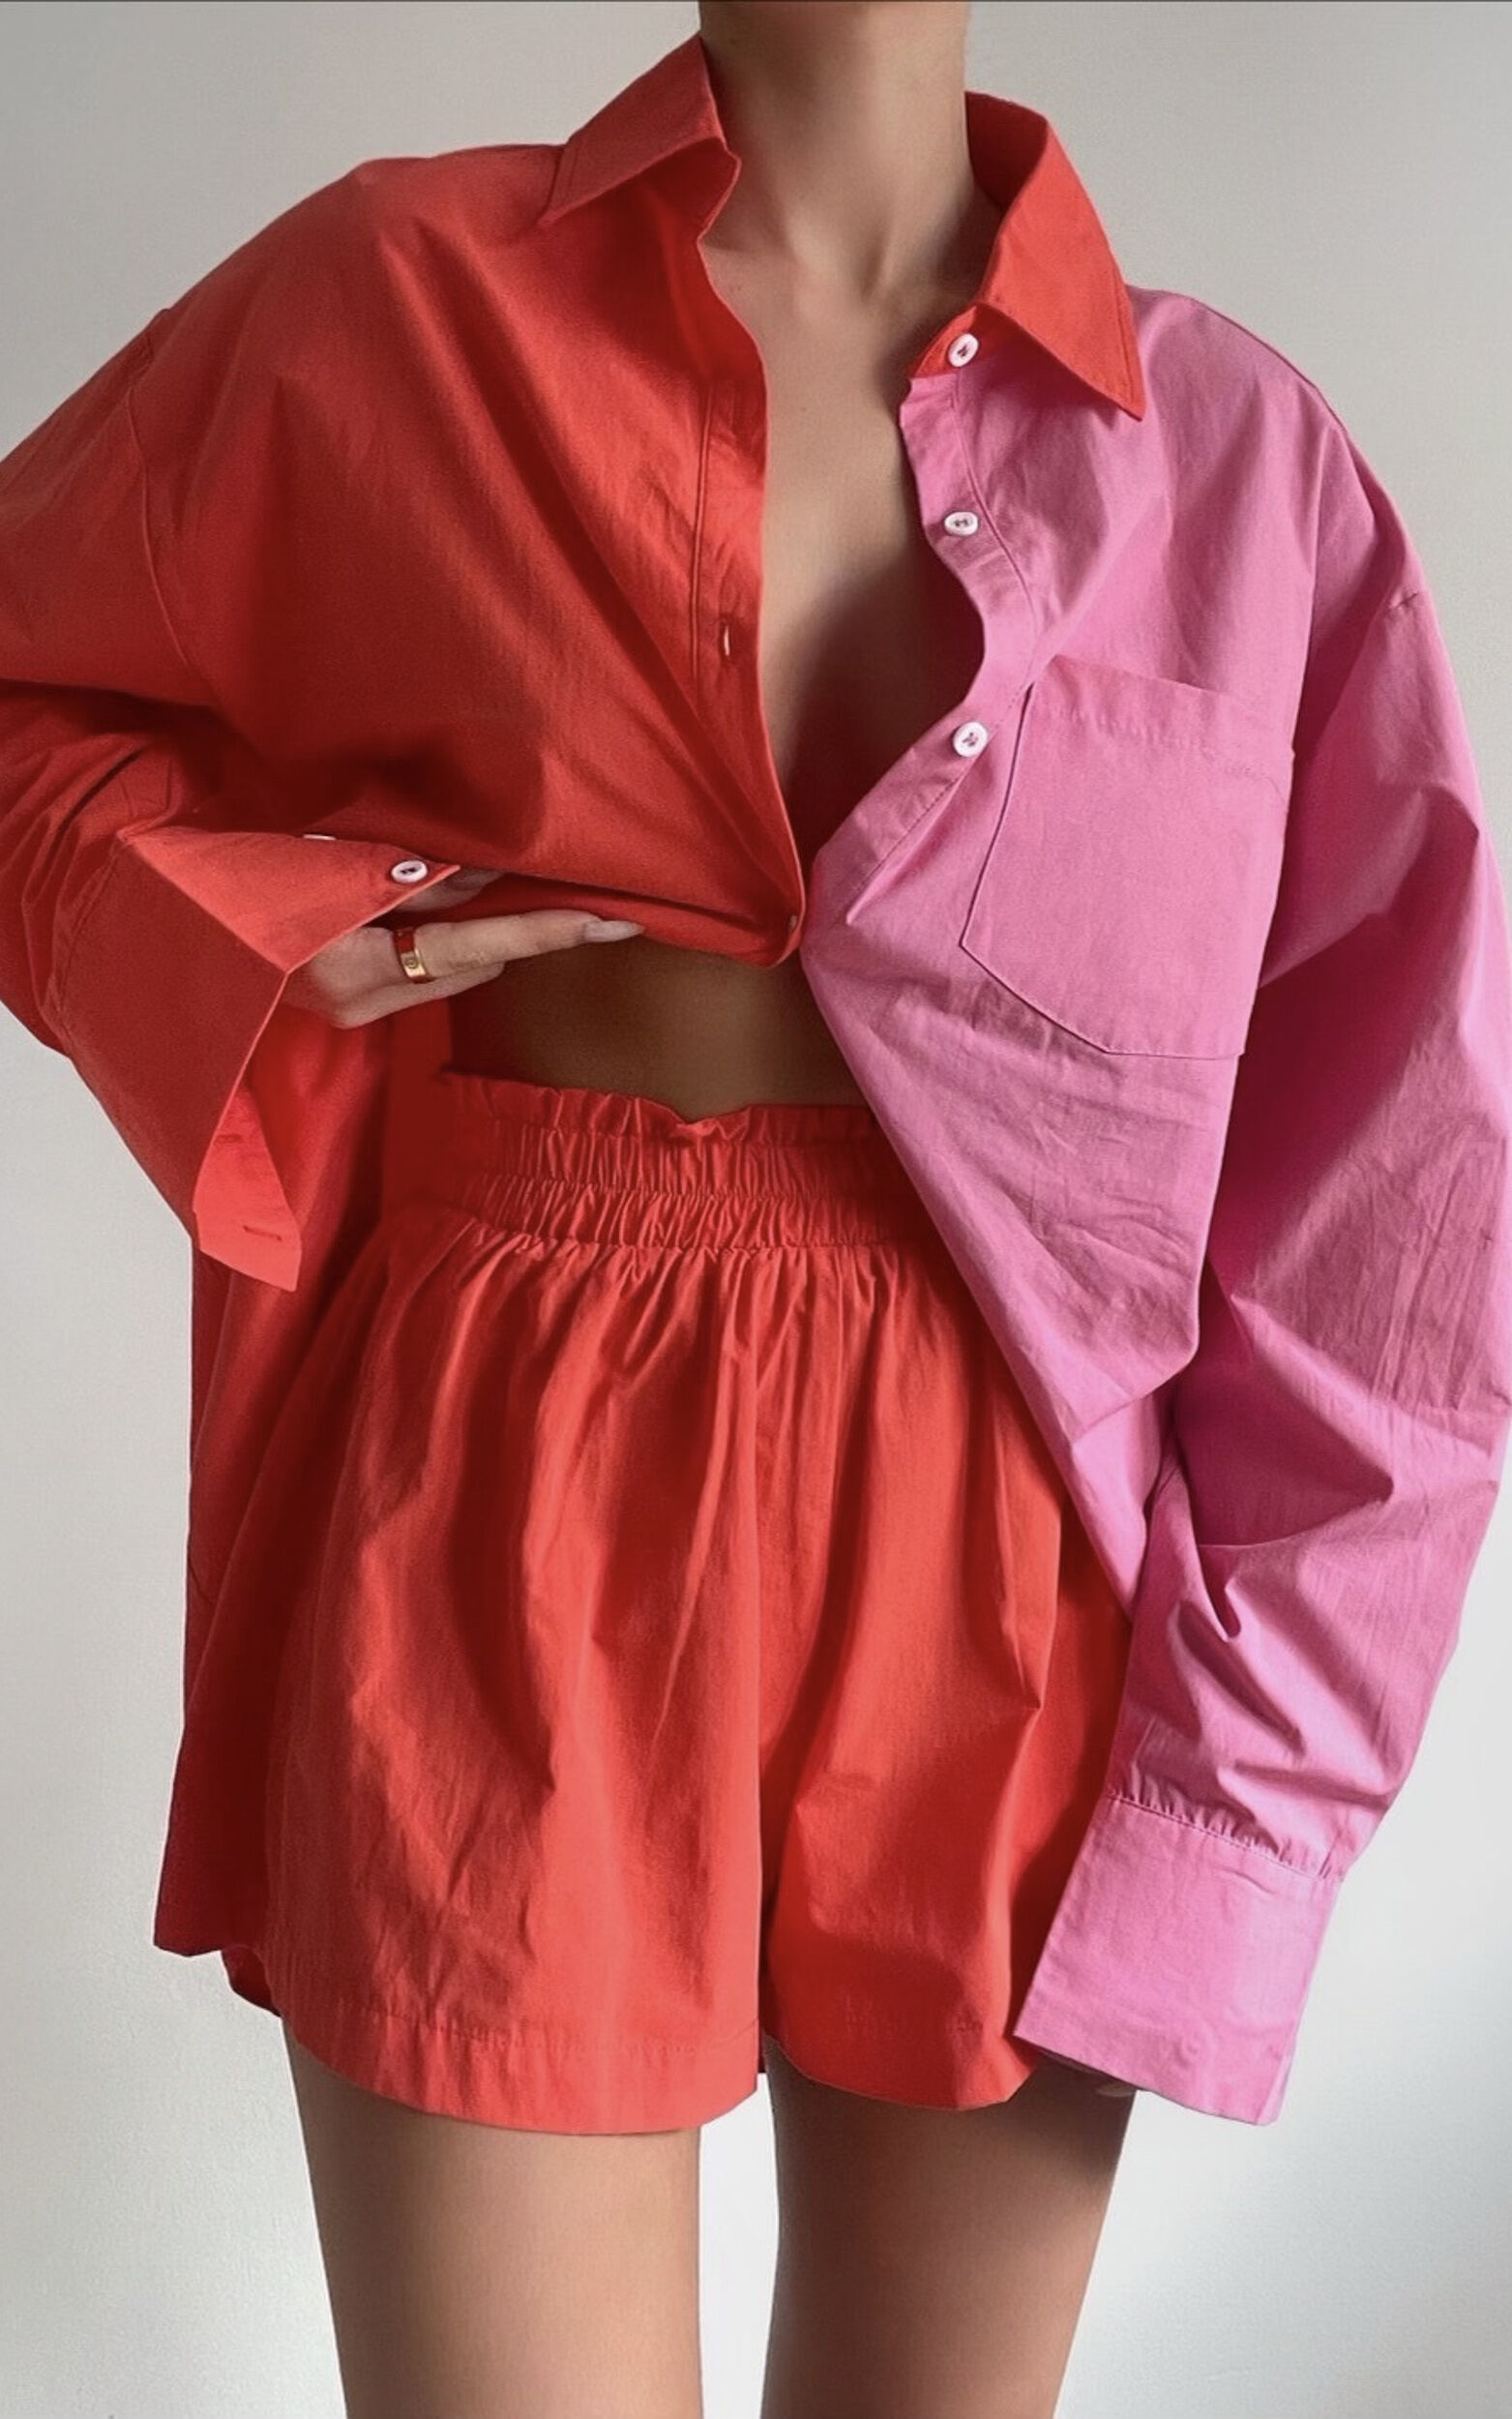 Roewe Shirt - Colour Block Oversized Button Up Shirt in Oxy Fire & Pink - 04, RED2